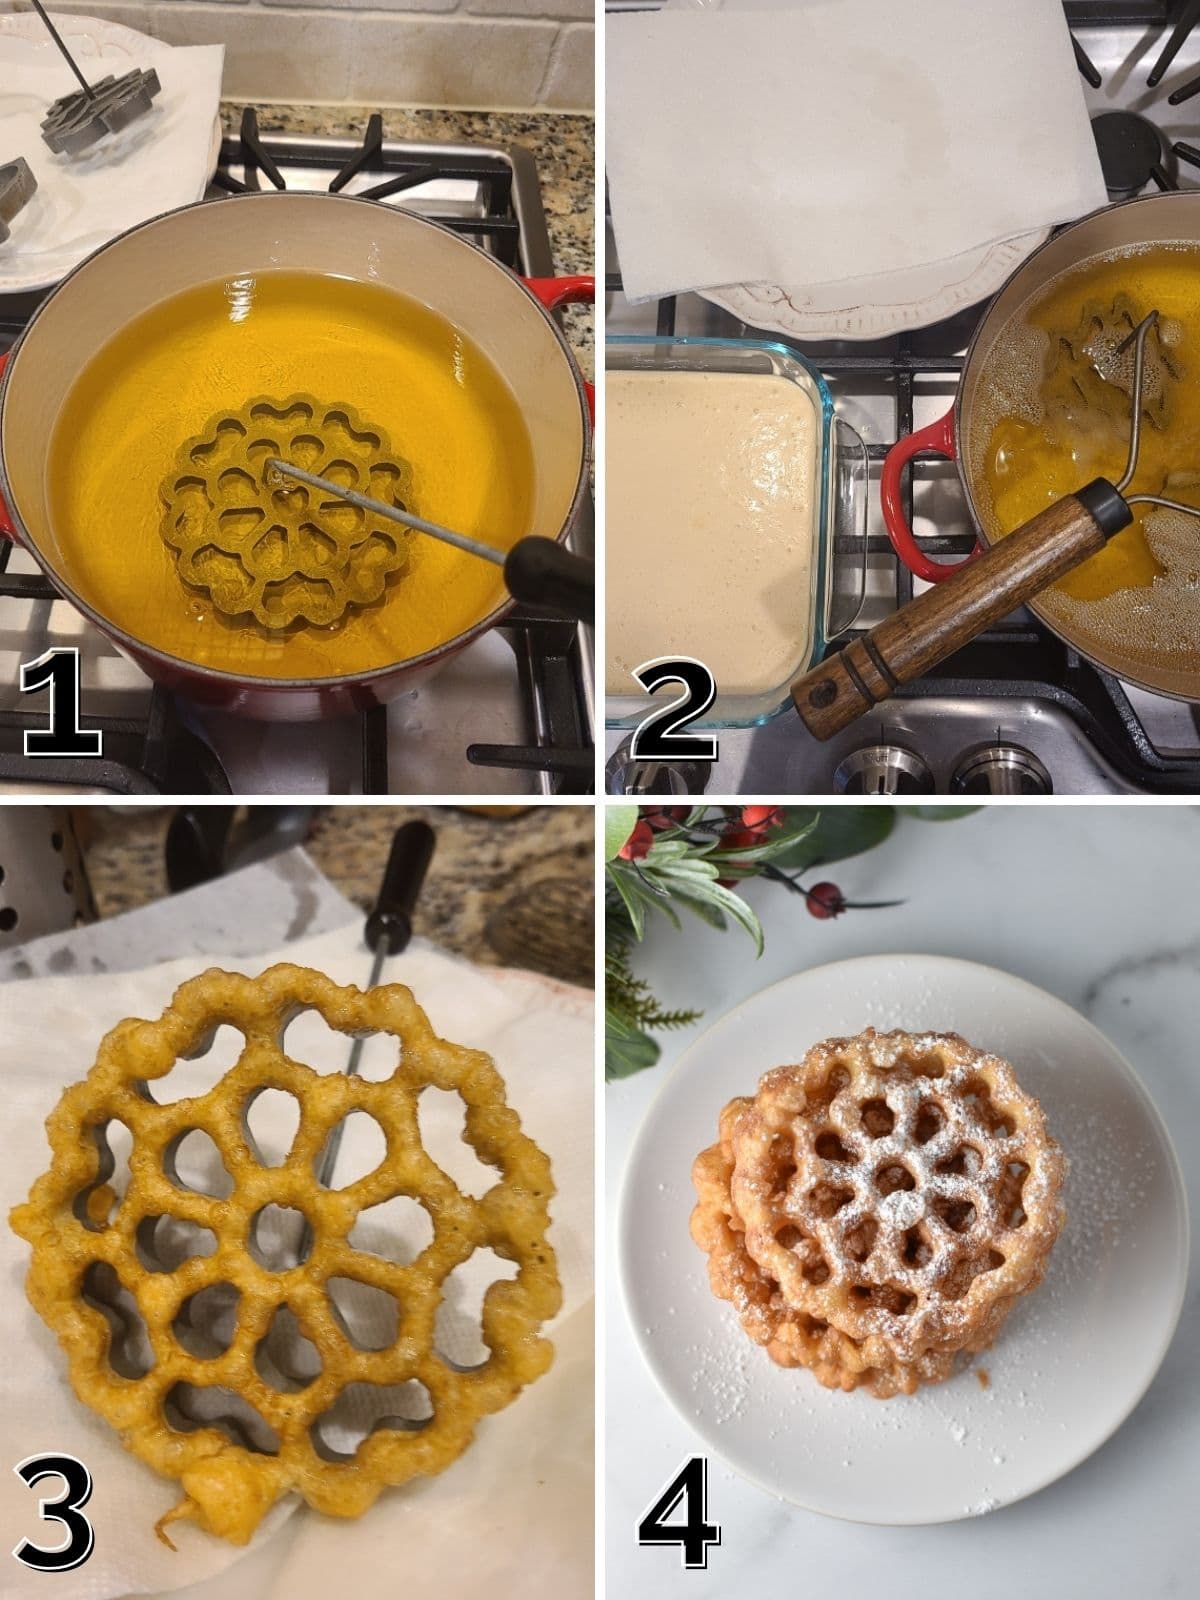 Step by step for frying rosette cookies by dipping iron into oil, then into batter, then frying in a pot.